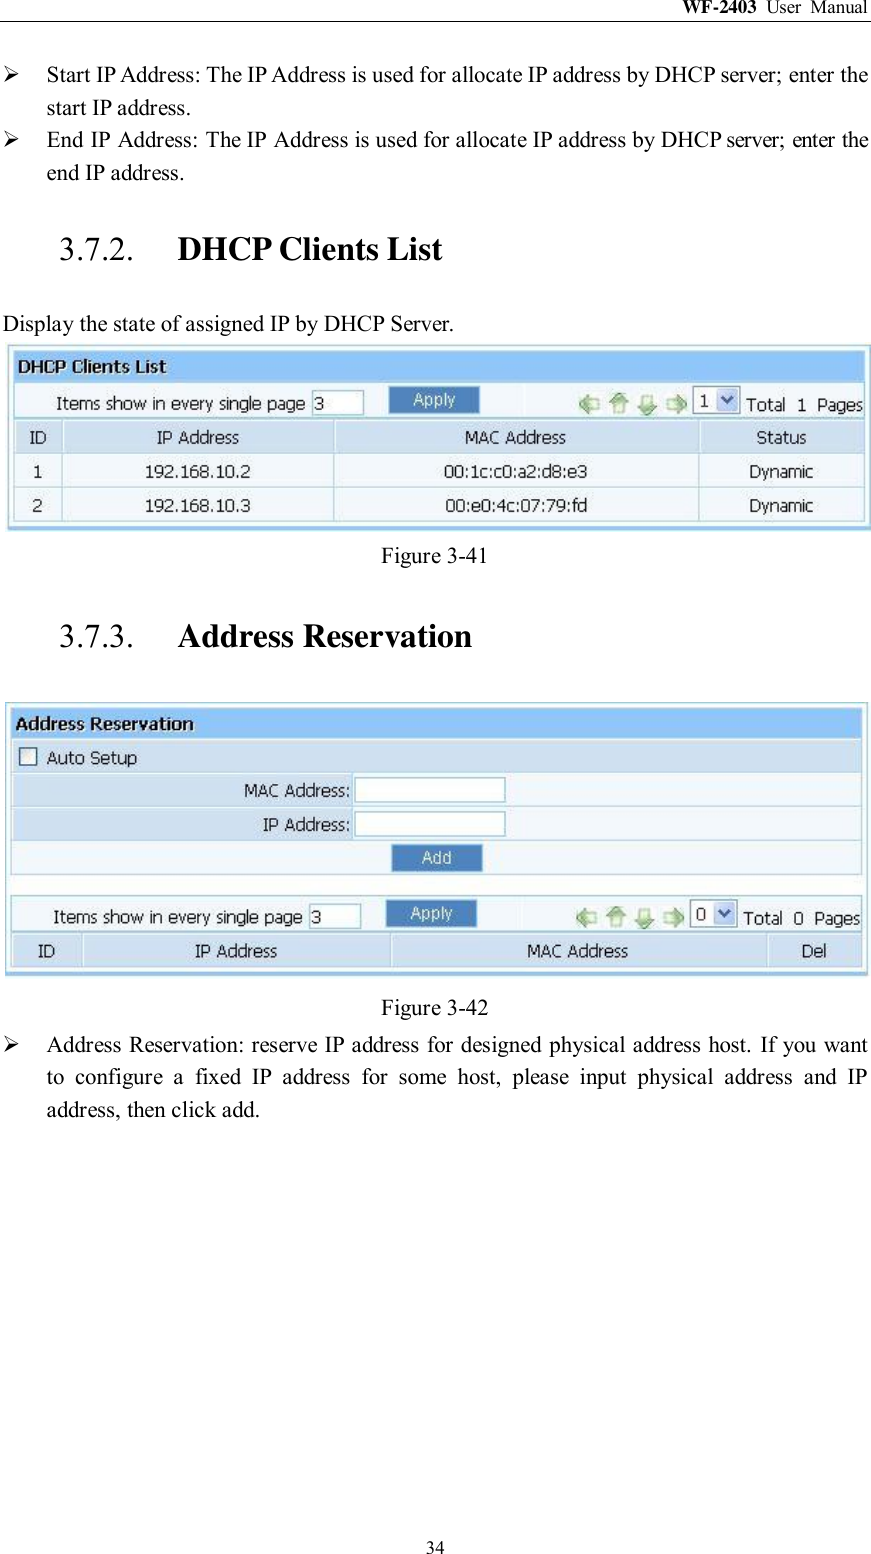 WF-2403  User  Manual  34  Start IP Address: The IP Address is used for allocate IP address by DHCP server; enter the start IP address.  End IP Address: The IP Address is used for allocate IP address by DHCP server; enter the end IP address. 3.7.2. DHCP Clients List Display the state of assigned IP by DHCP Server.  Figure 3-41 3.7.3. Address Reservation  Figure 3-42  Address Reservation: reserve IP address for designed physical address host. If you want to  configure  a  fixed  IP  address  for  some  host,  please  input  physical  address  and  IP address, then click add. 